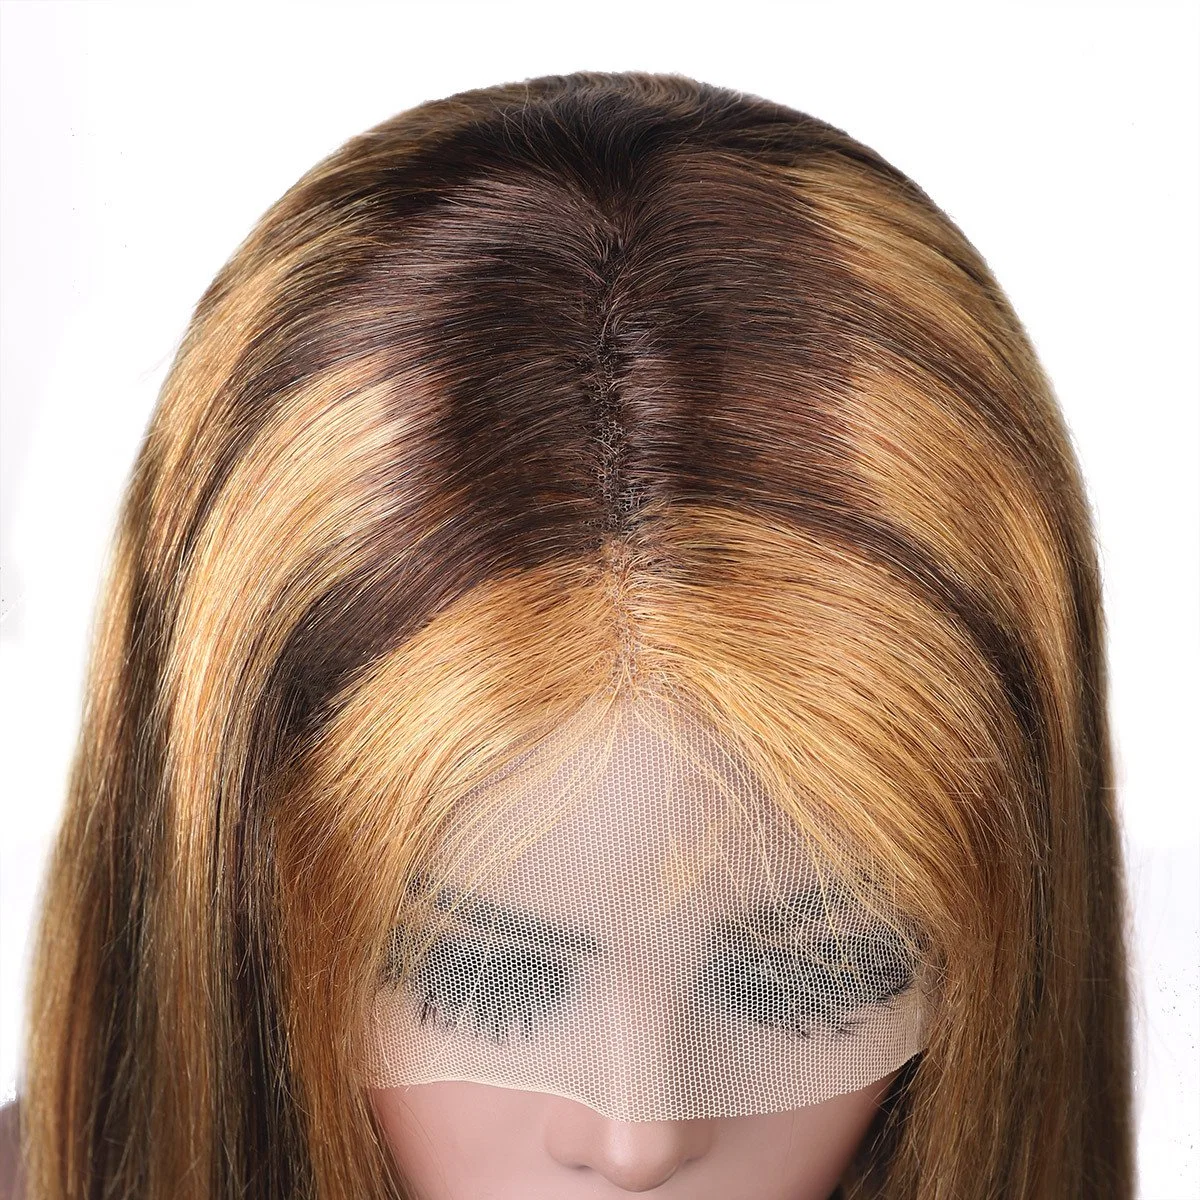 New Look Fashion Wigs Lace Front Wigs Body Human Hair Women HD Transparent Lace Front Wigs Wigs Accessories